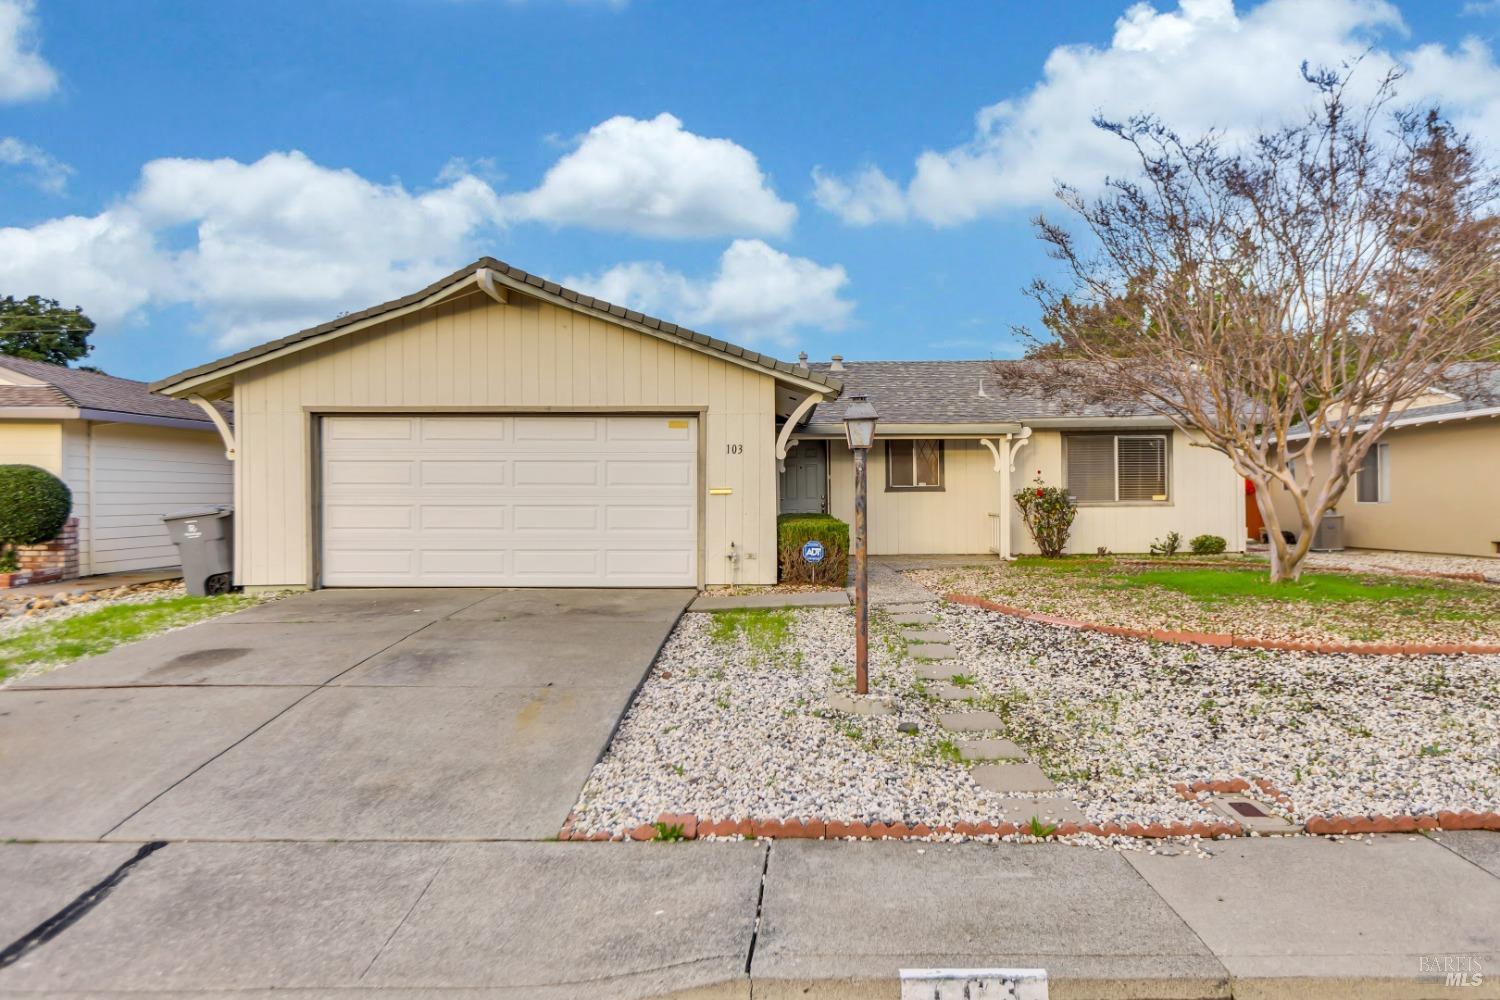 Photo of 103 Isle Royale Cir in Vacaville, CA